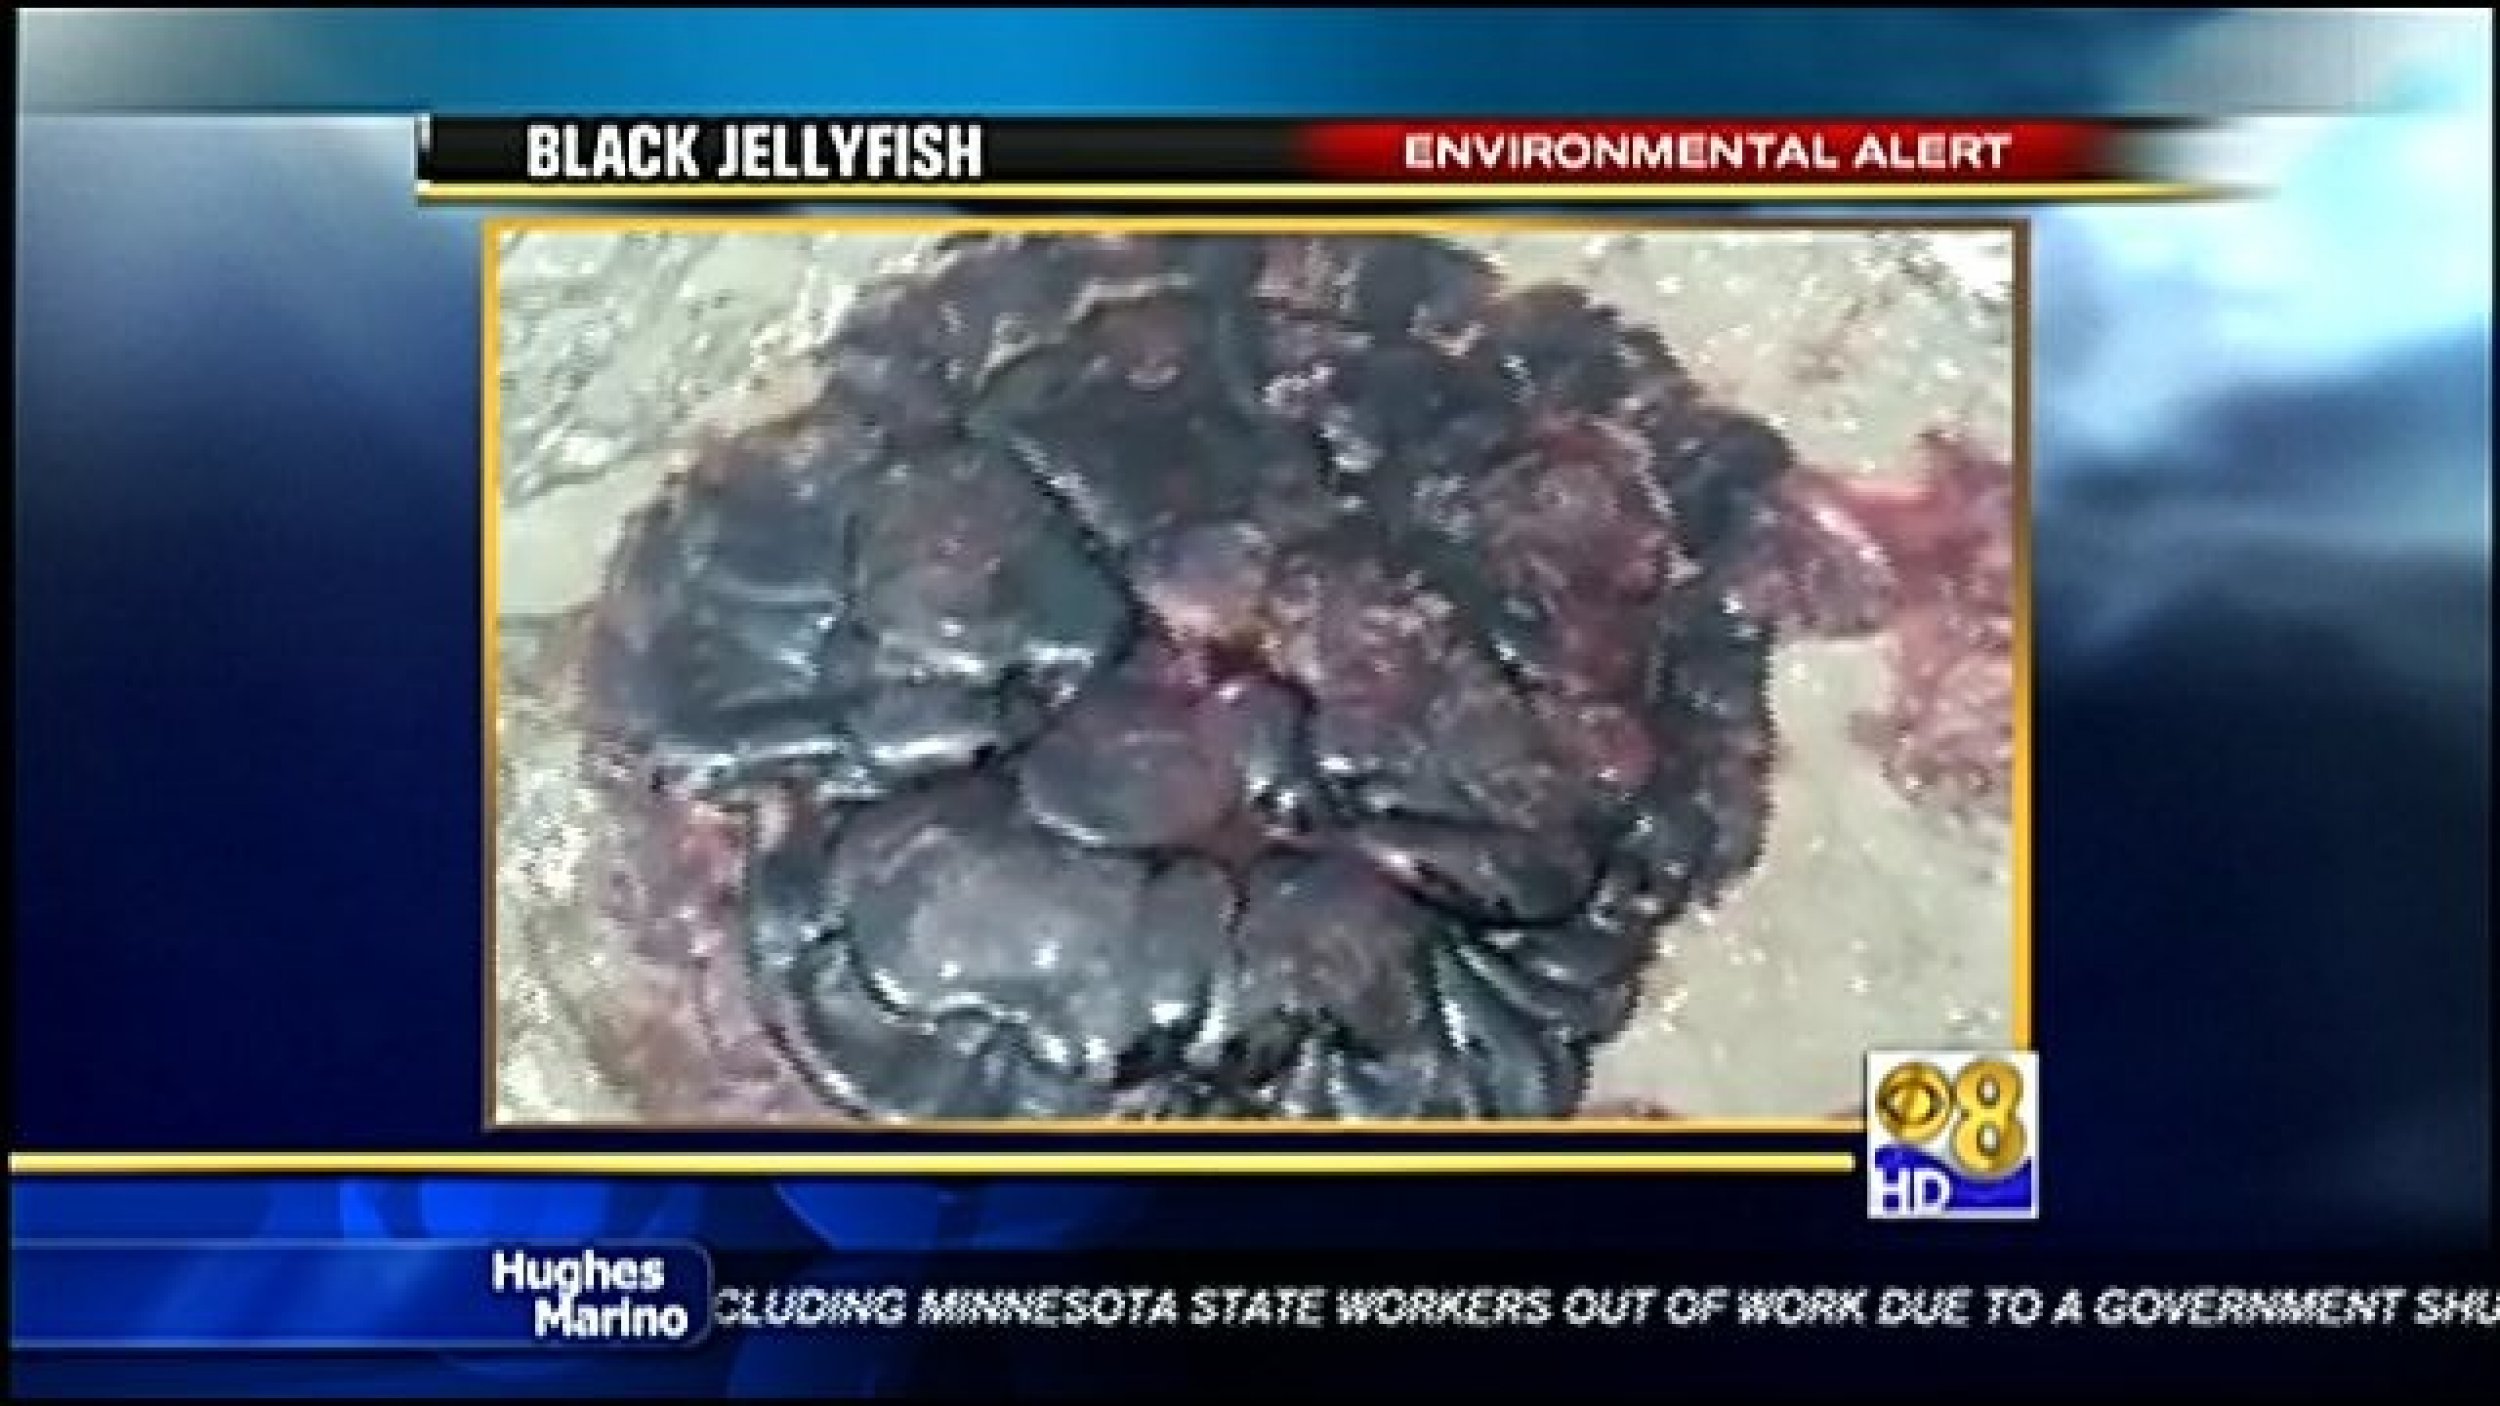 A rare black jellyfish was found off the coast of La Jolla in San Diego by a kayaker